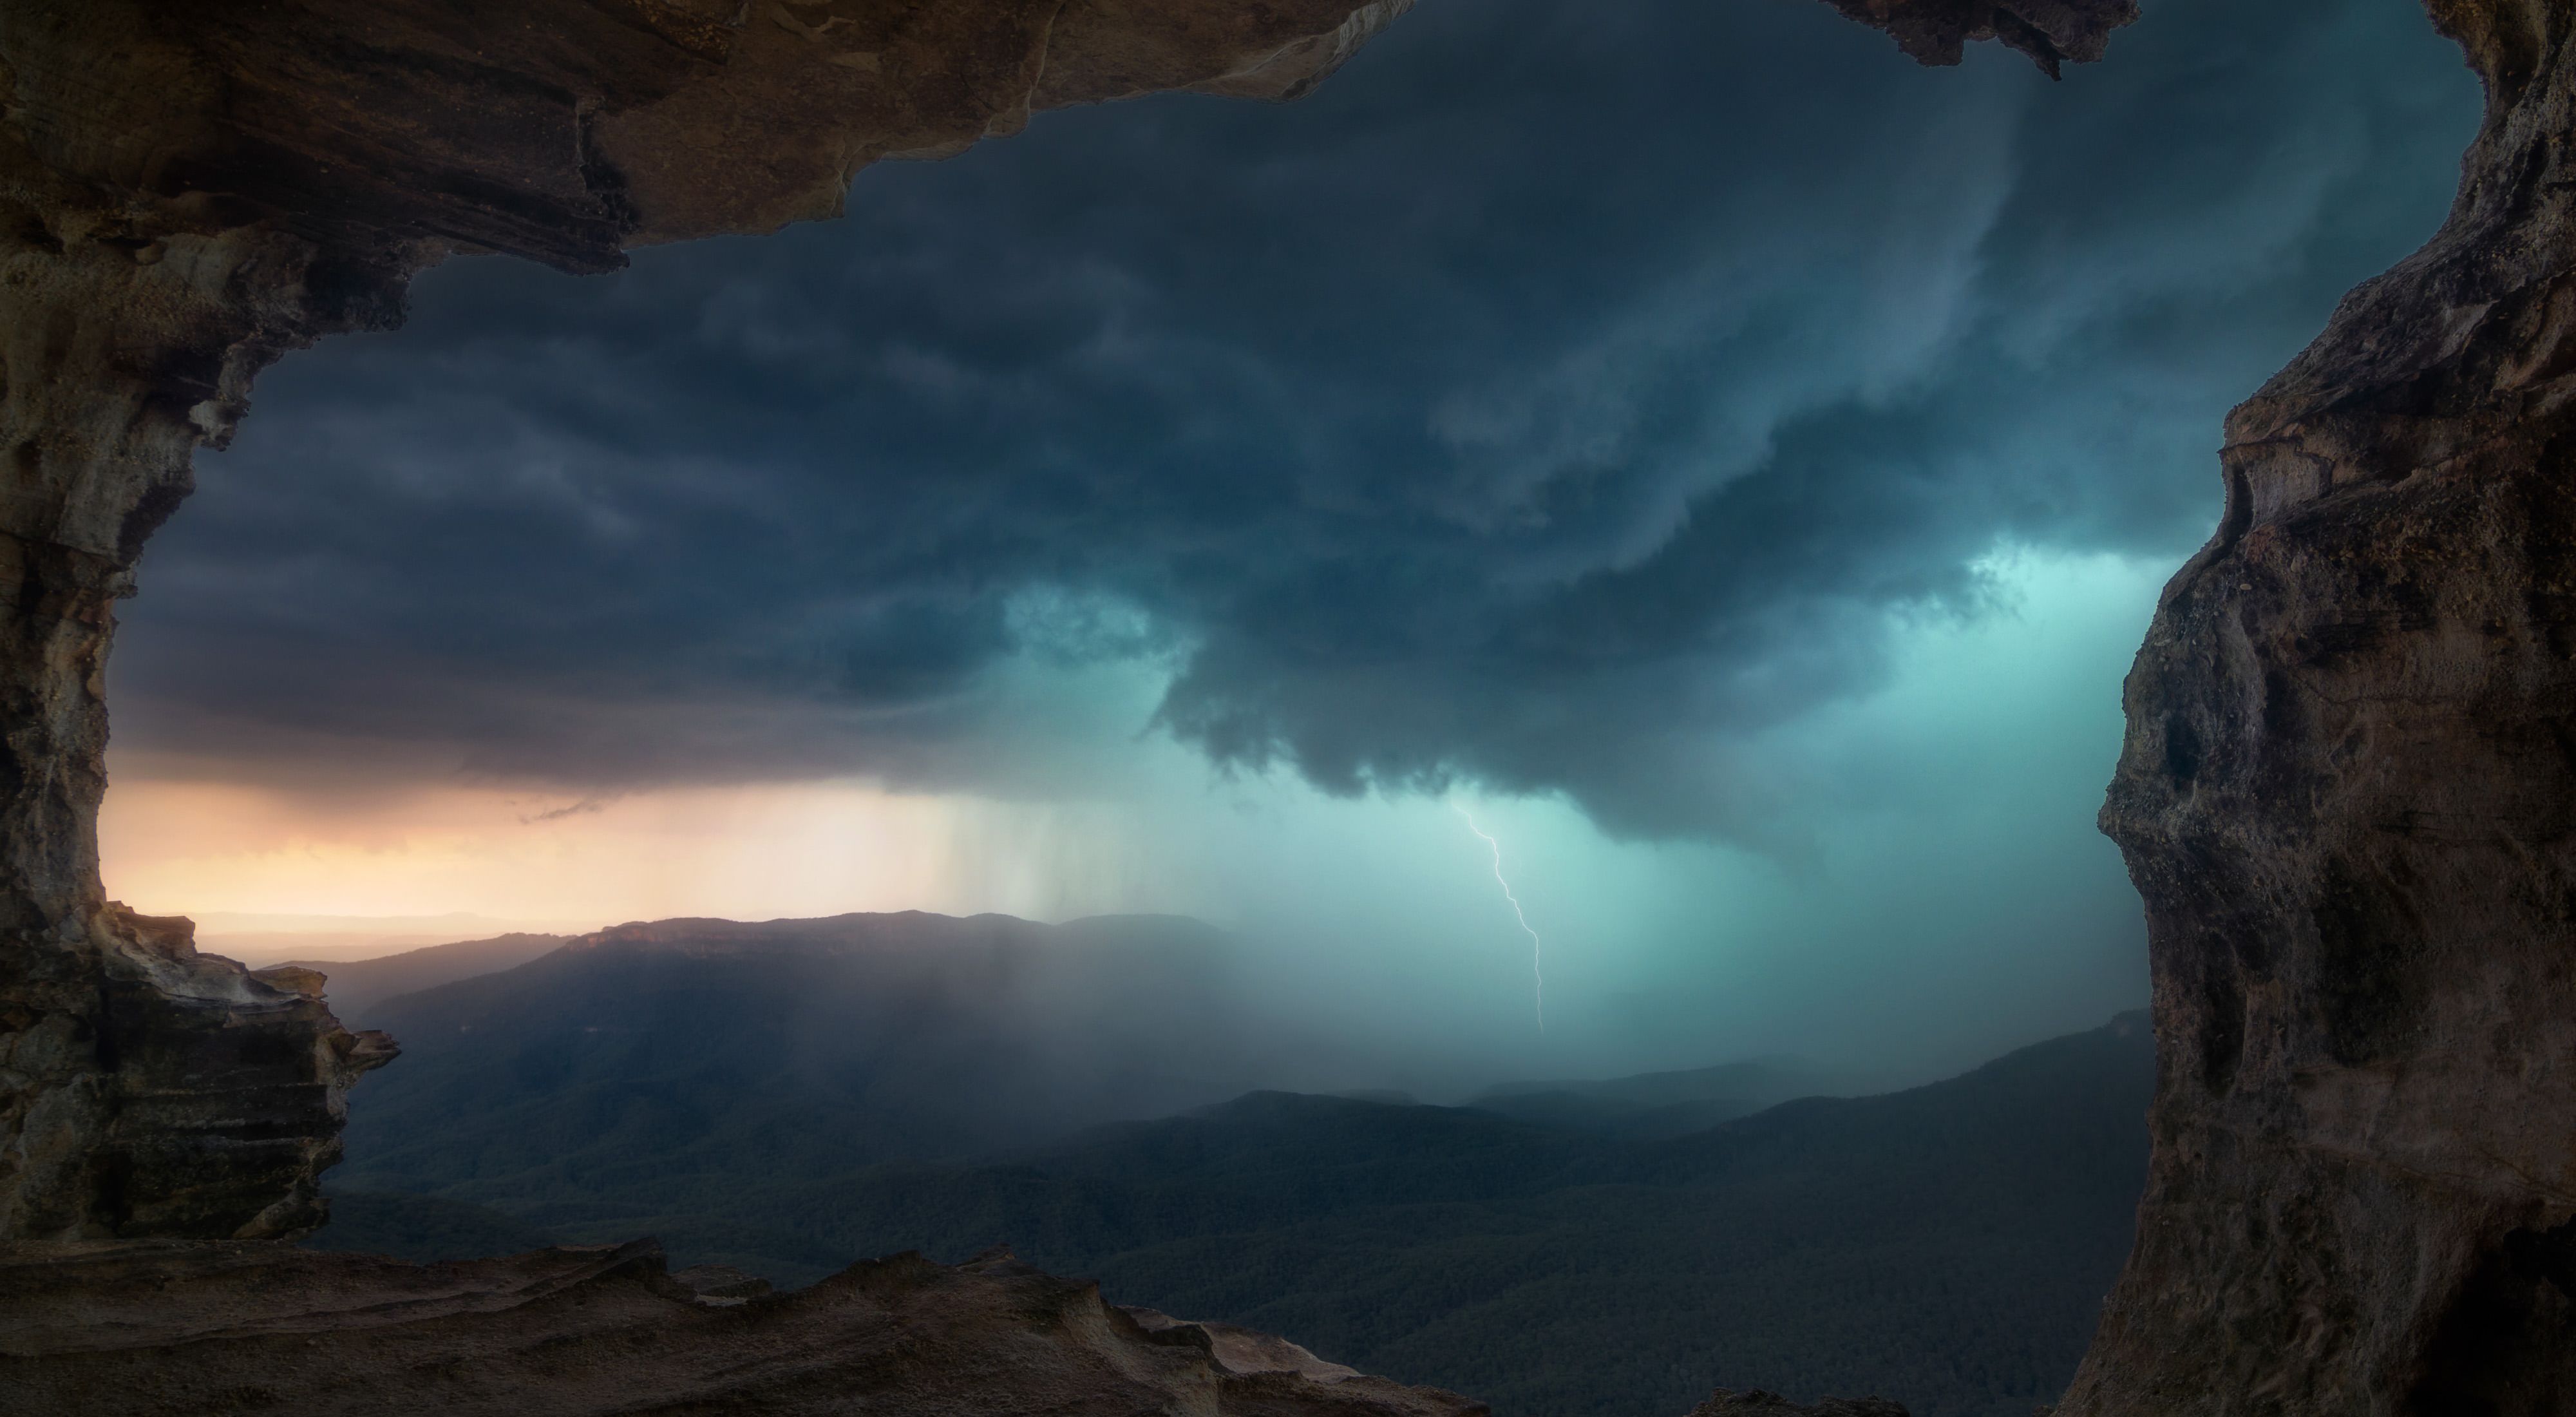 2019 Photo Contest - Storm from a cave, Blue Mountains, NSW